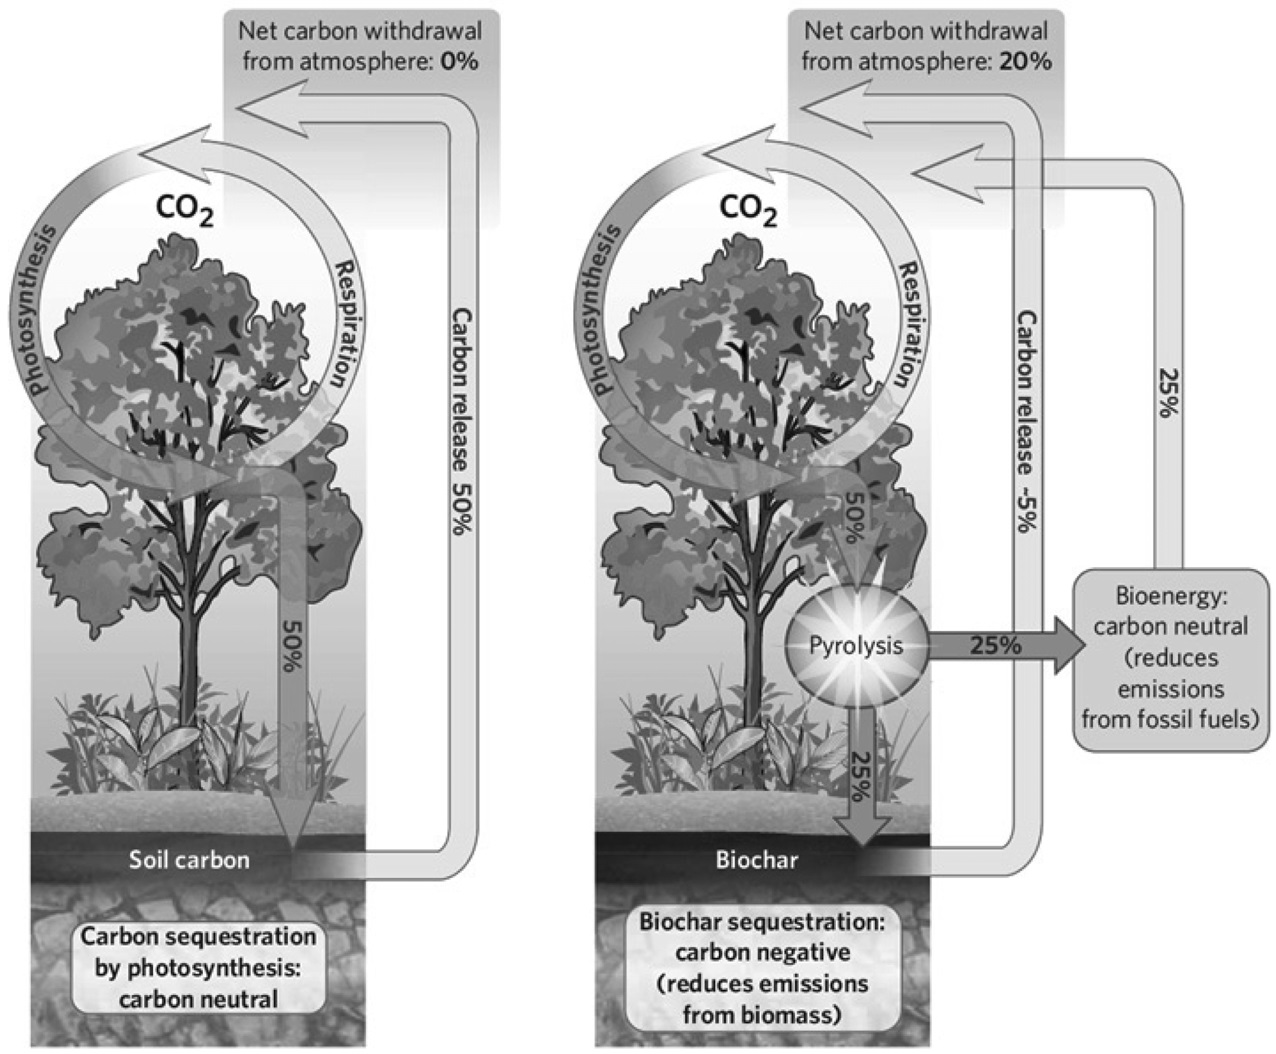 Comparison of carbon negative biochar sequestration to carbon neutral photosynthesis[2], with permission from the publisher.